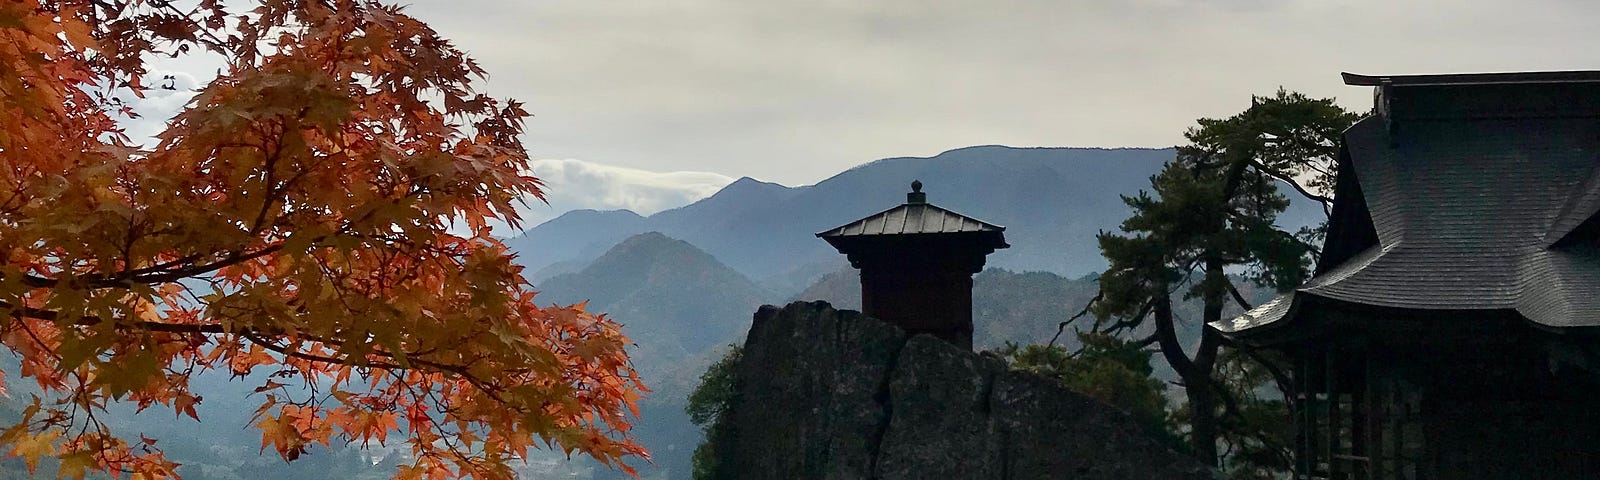 Iconic small temple on clifftop with moutains int he background